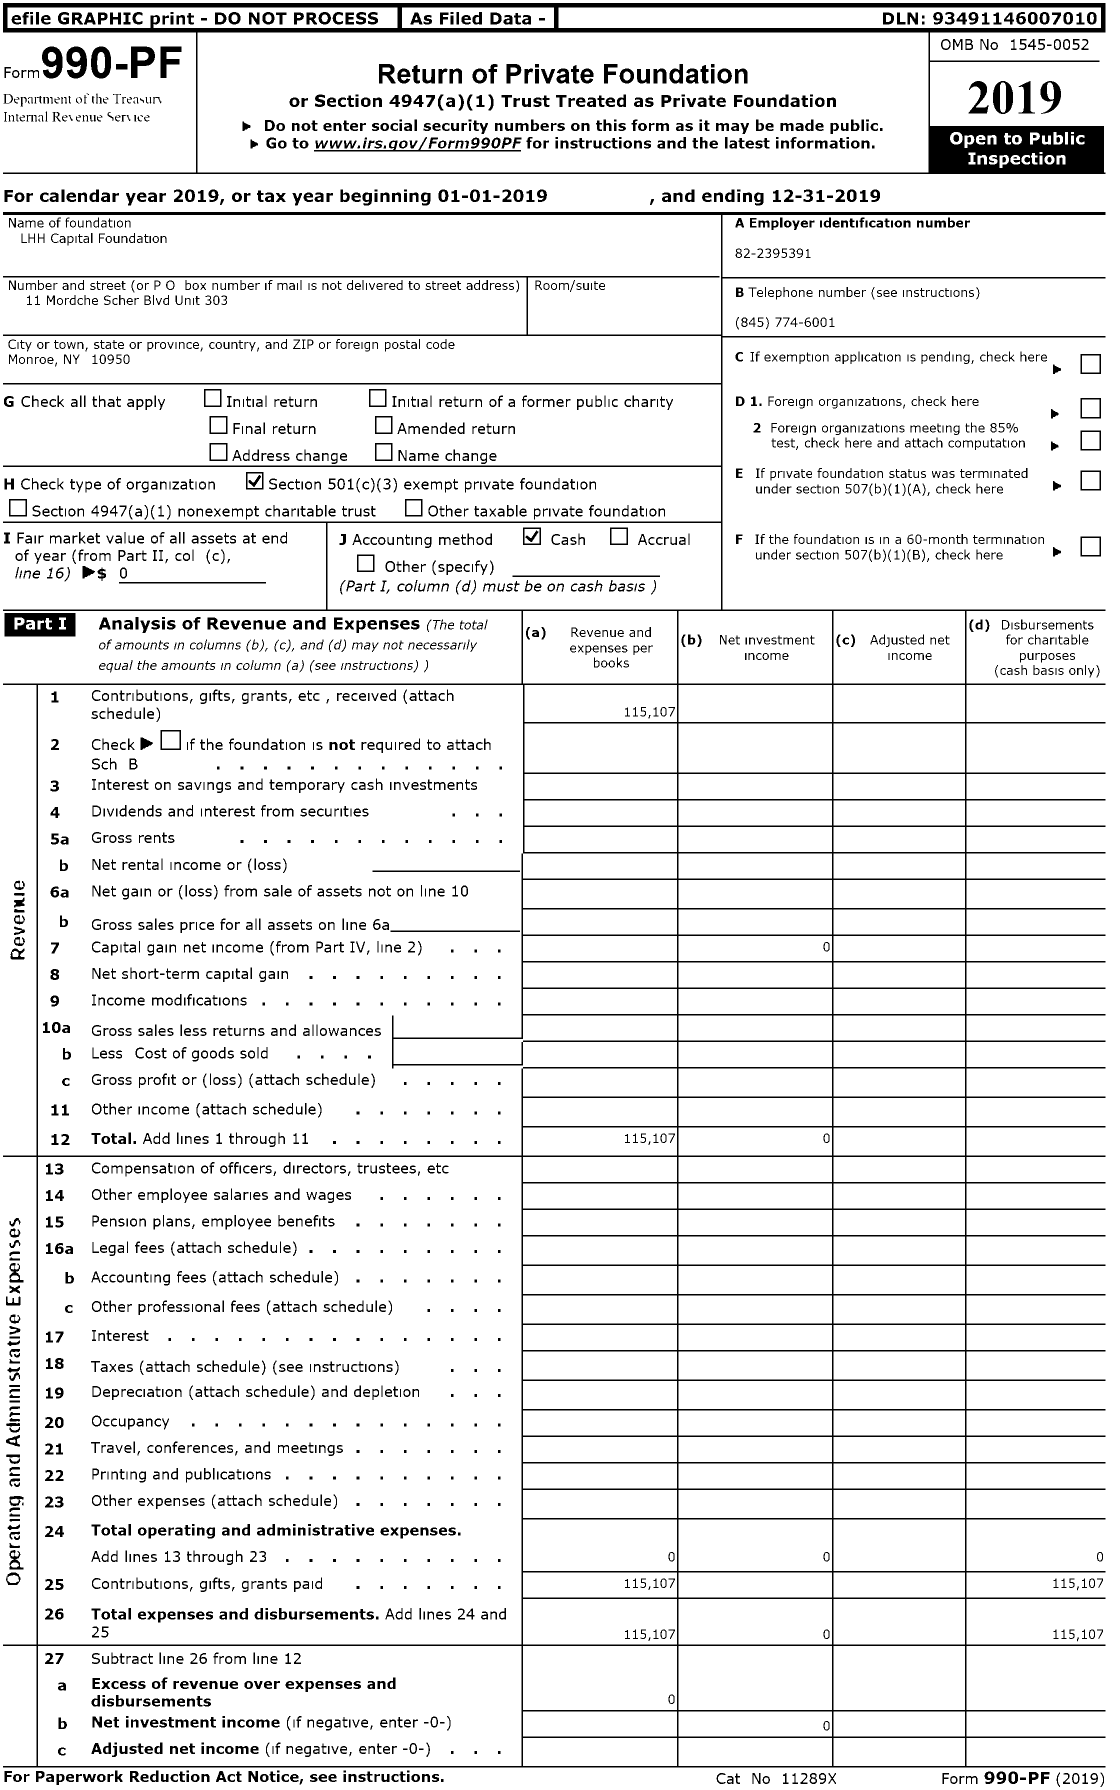 Image of first page of 2019 Form 990PR for LHH Capital Foundation